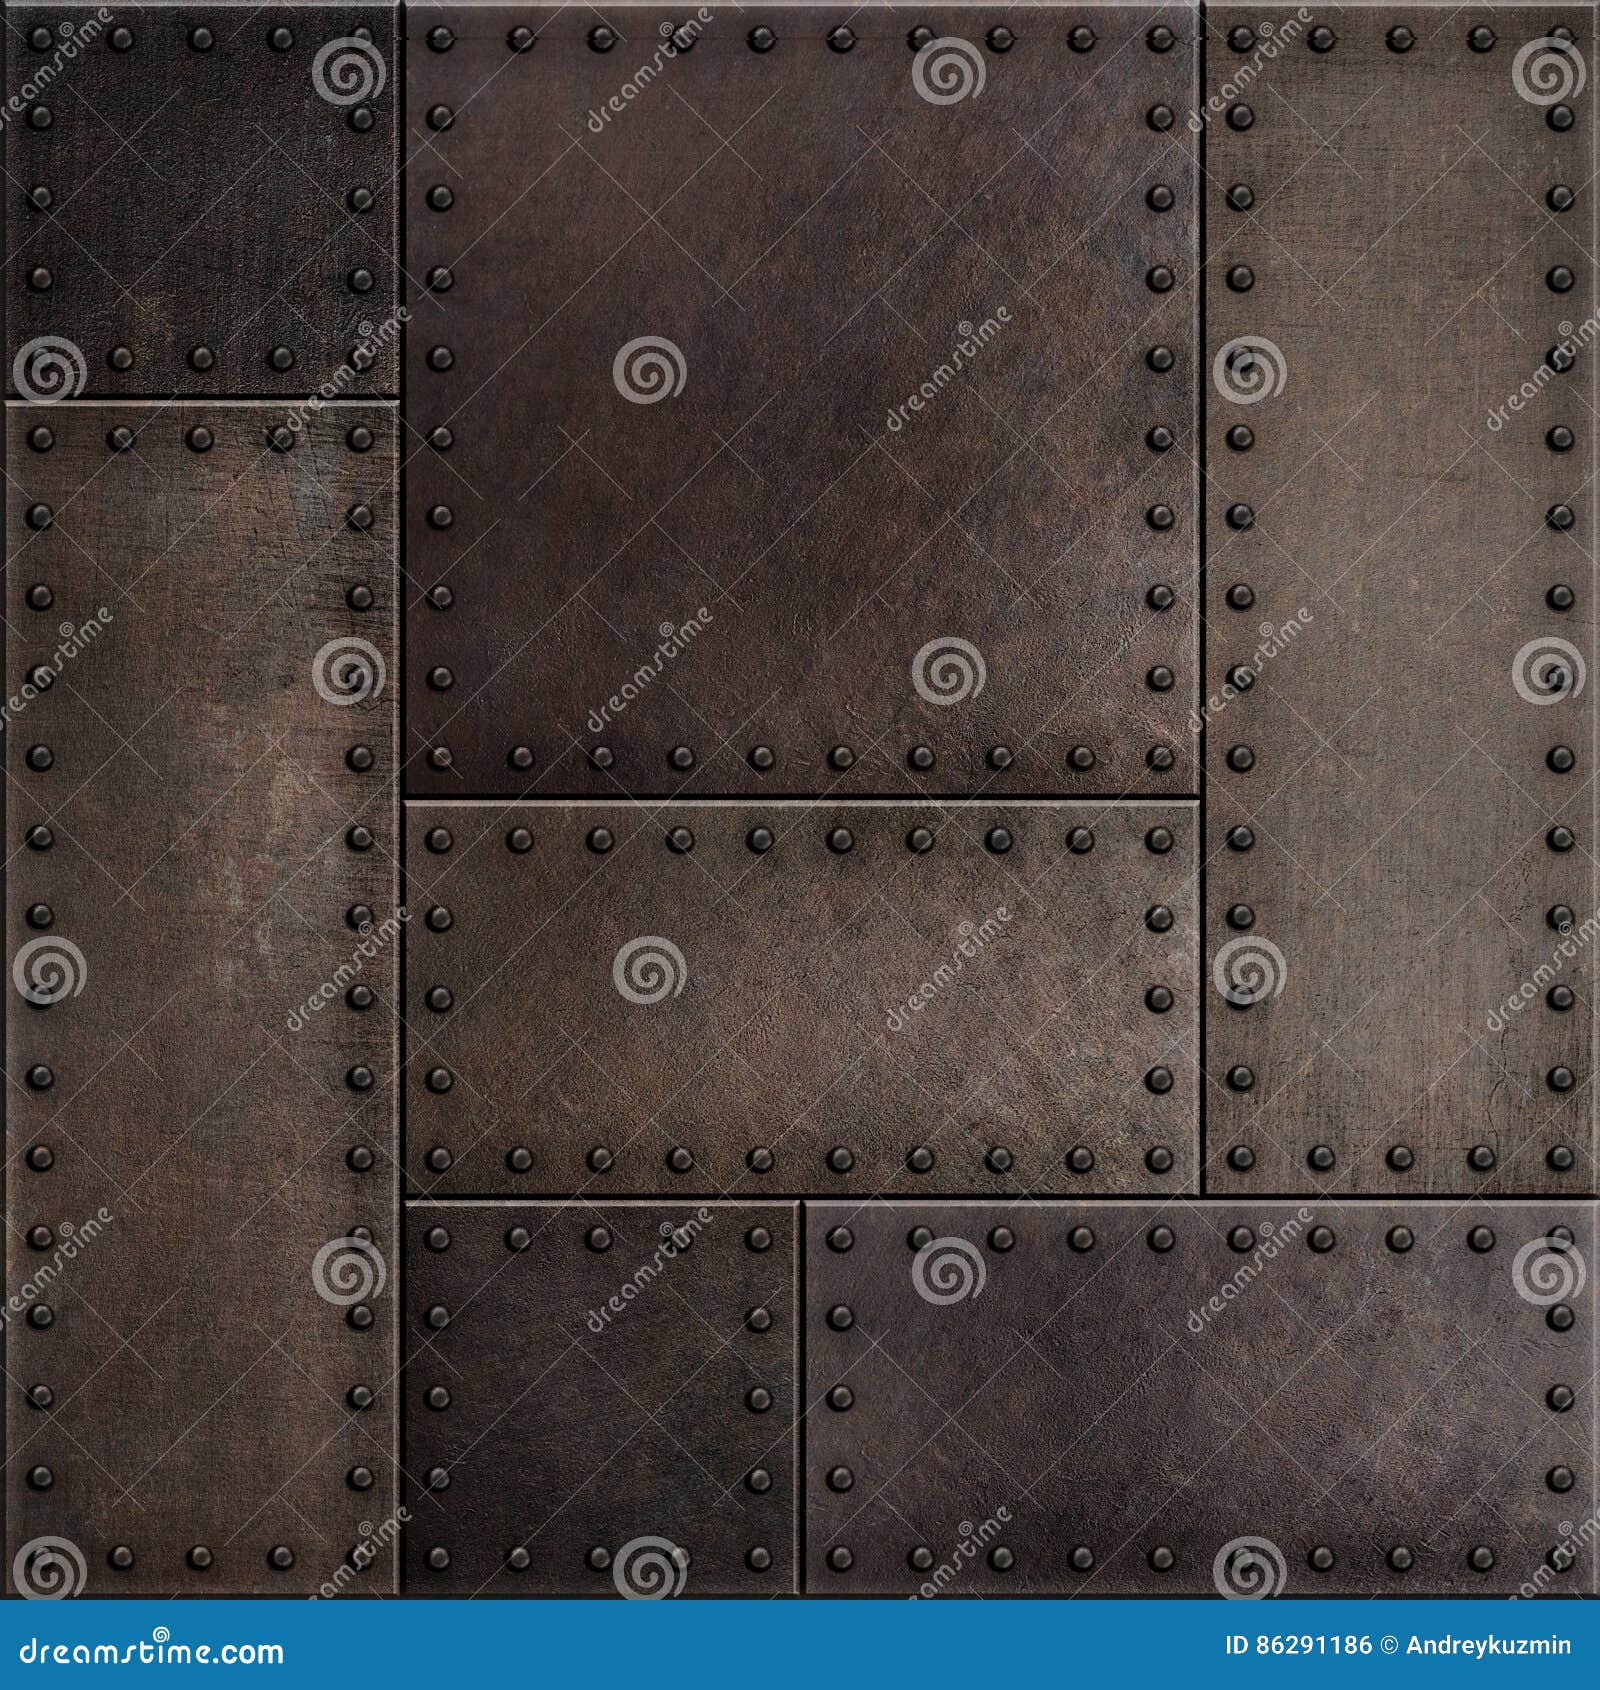 dark rusty metal plates with rivets seamless background or texture